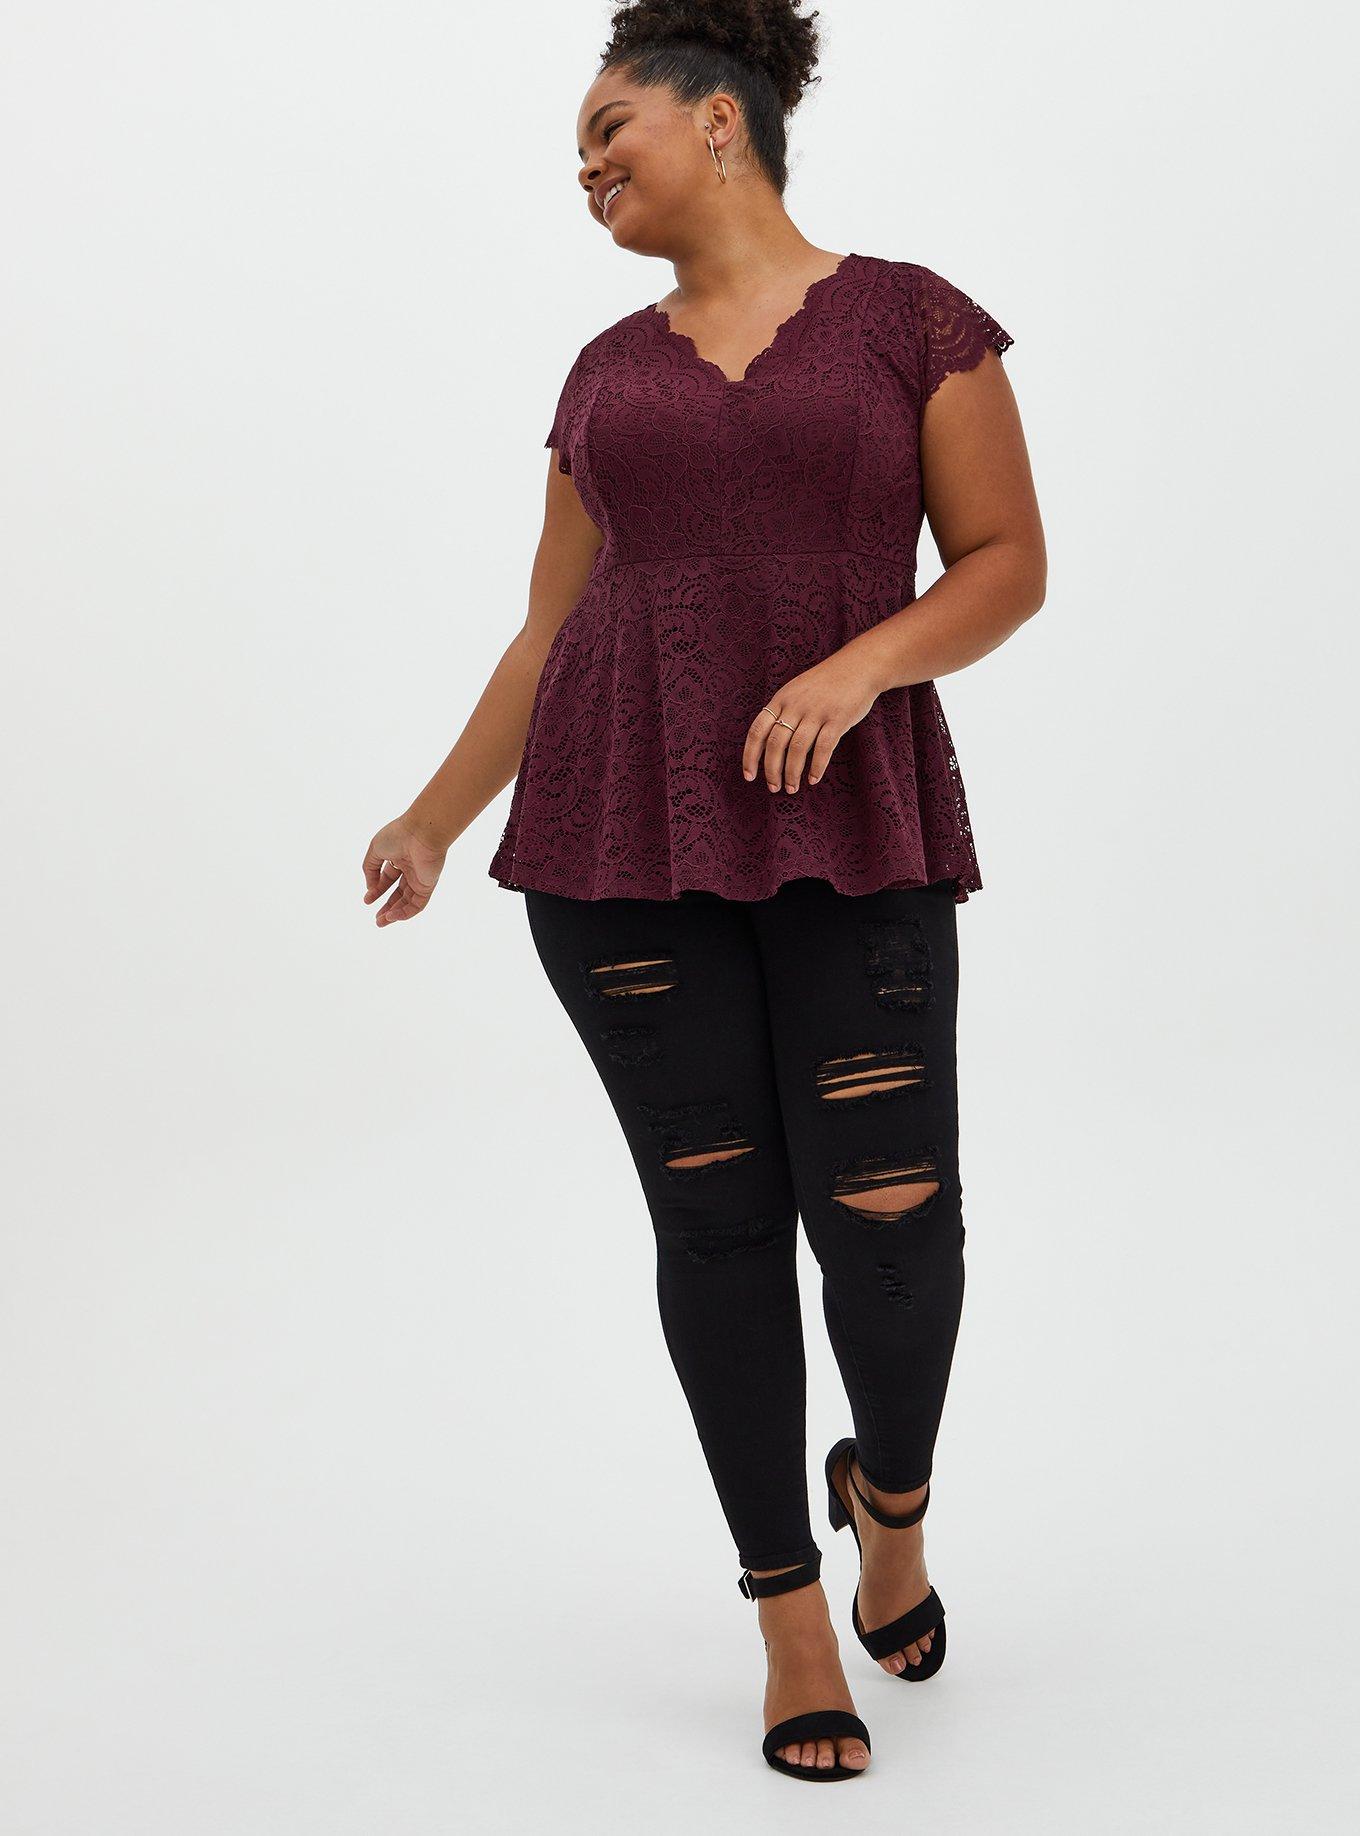 Scalloped Lace V-Neck Short Sleeves Insert Tee Top Burgundy S by